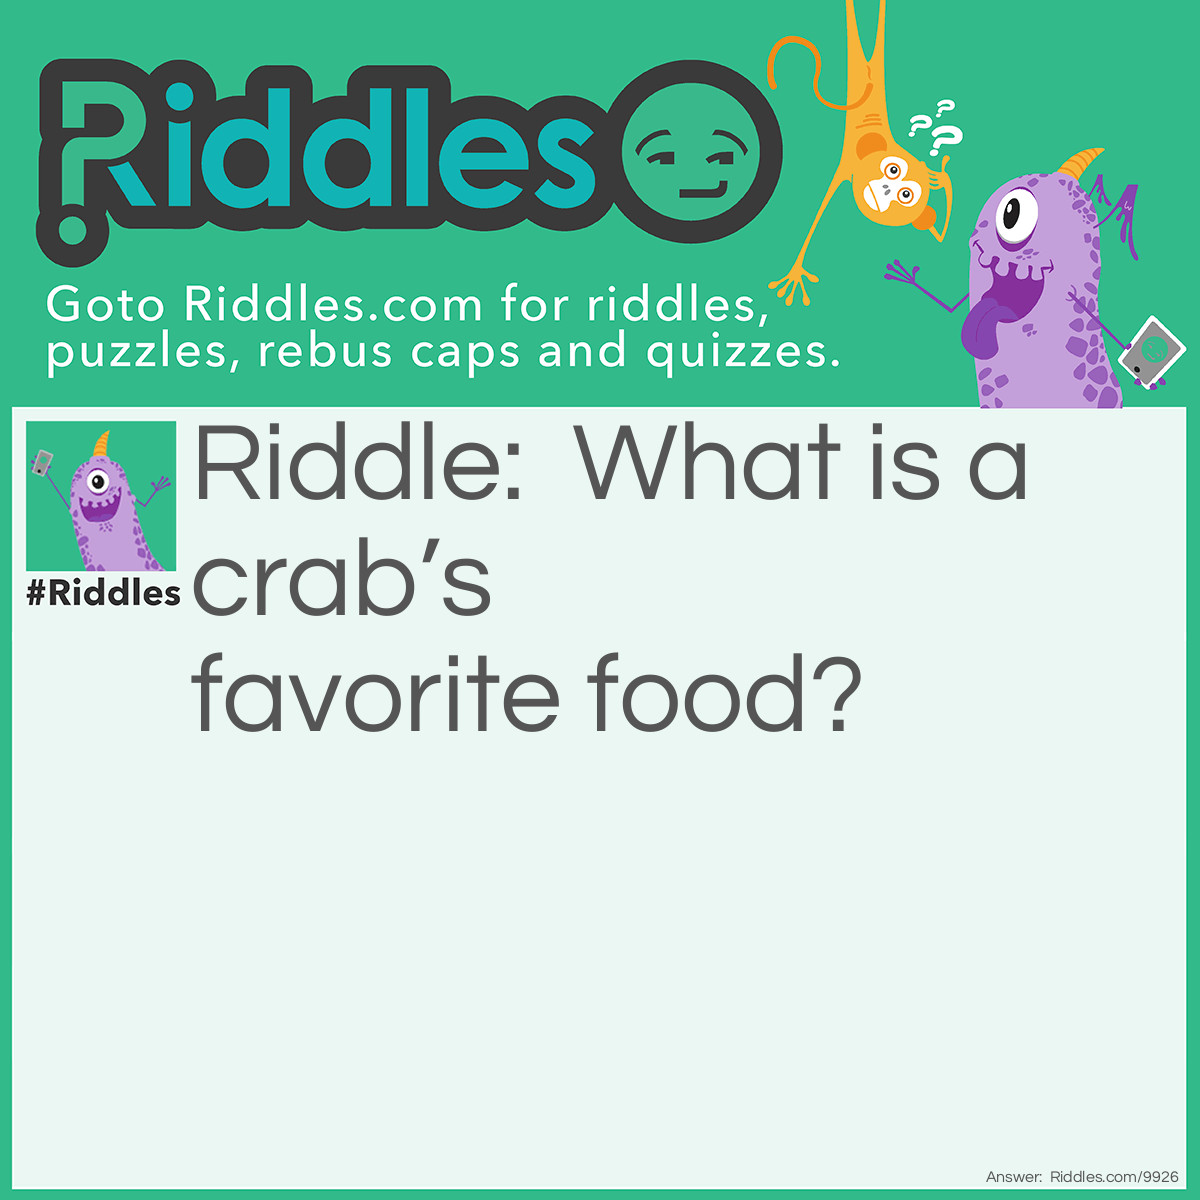 Riddle: What is a crab's favorite food? Answer: Pinch-elada!